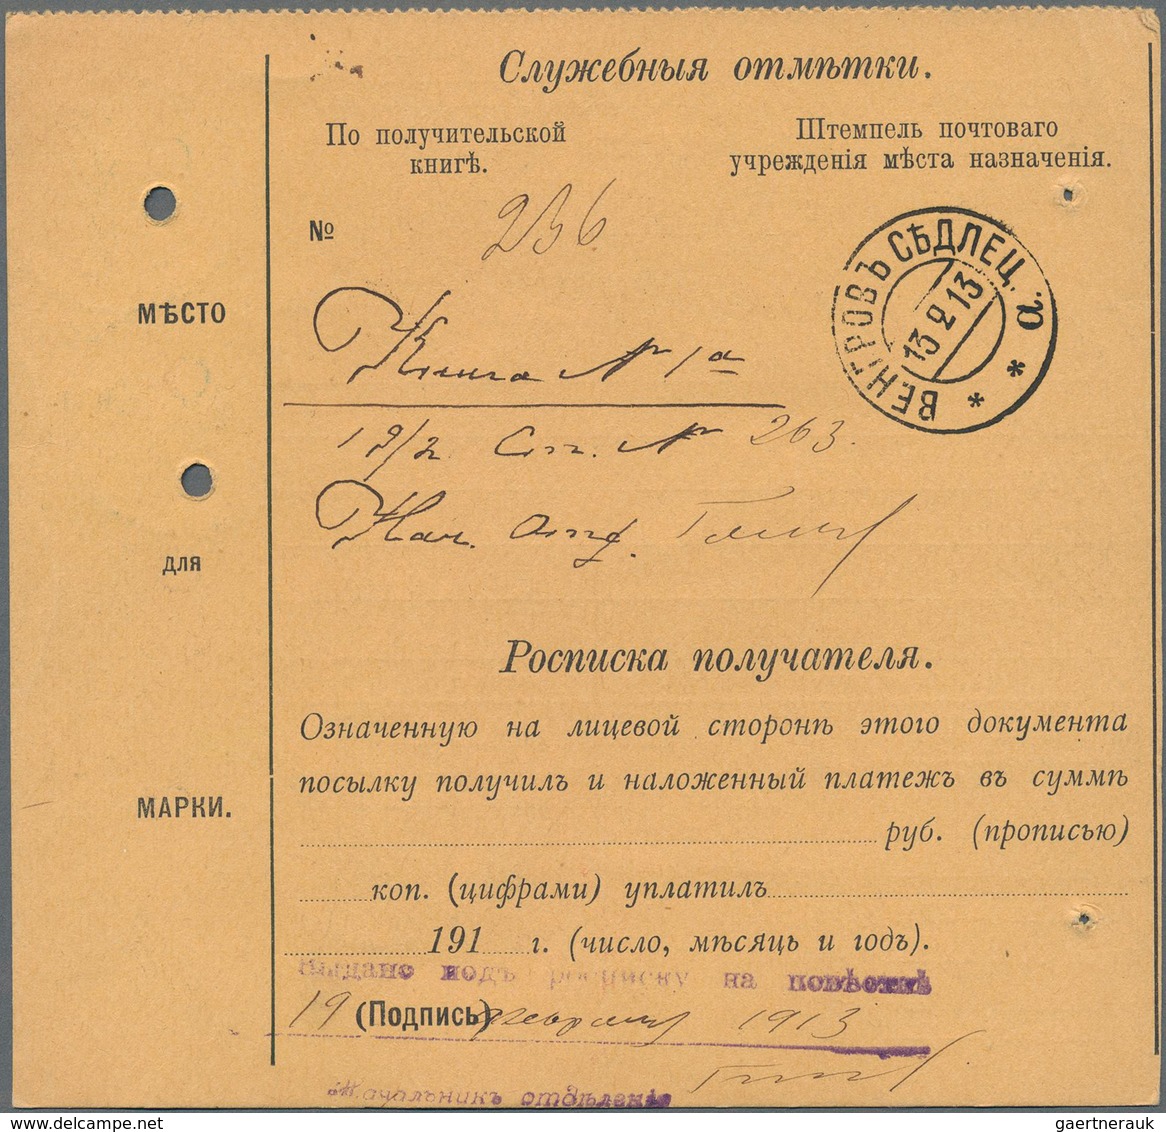 Russland: 1909/13 accompanying cards for five parcels all sent from Moscow to Poland (Vengrov, Vloda